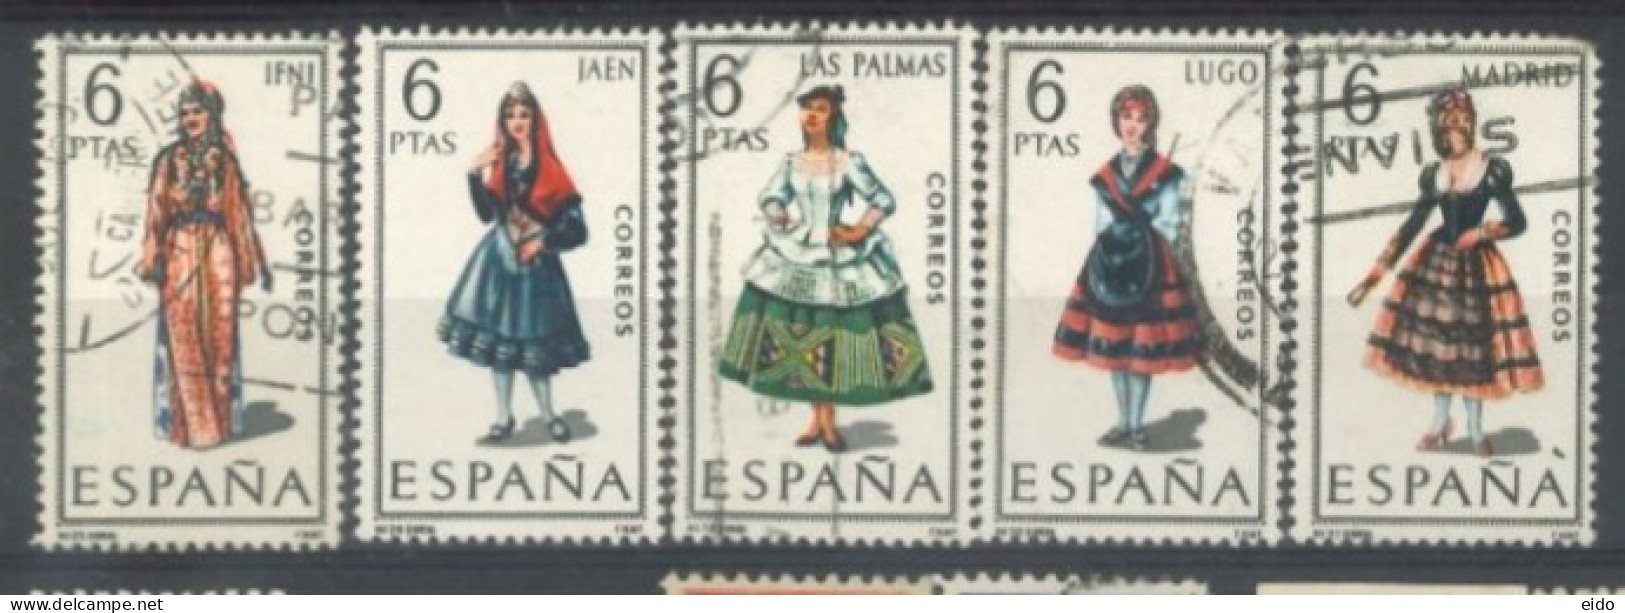 SPAIN, 1969, REGIONAL COSTUMES STAMPS SET OF 5, # 1416/17,1421/22/34, &1437, USED. - Used Stamps